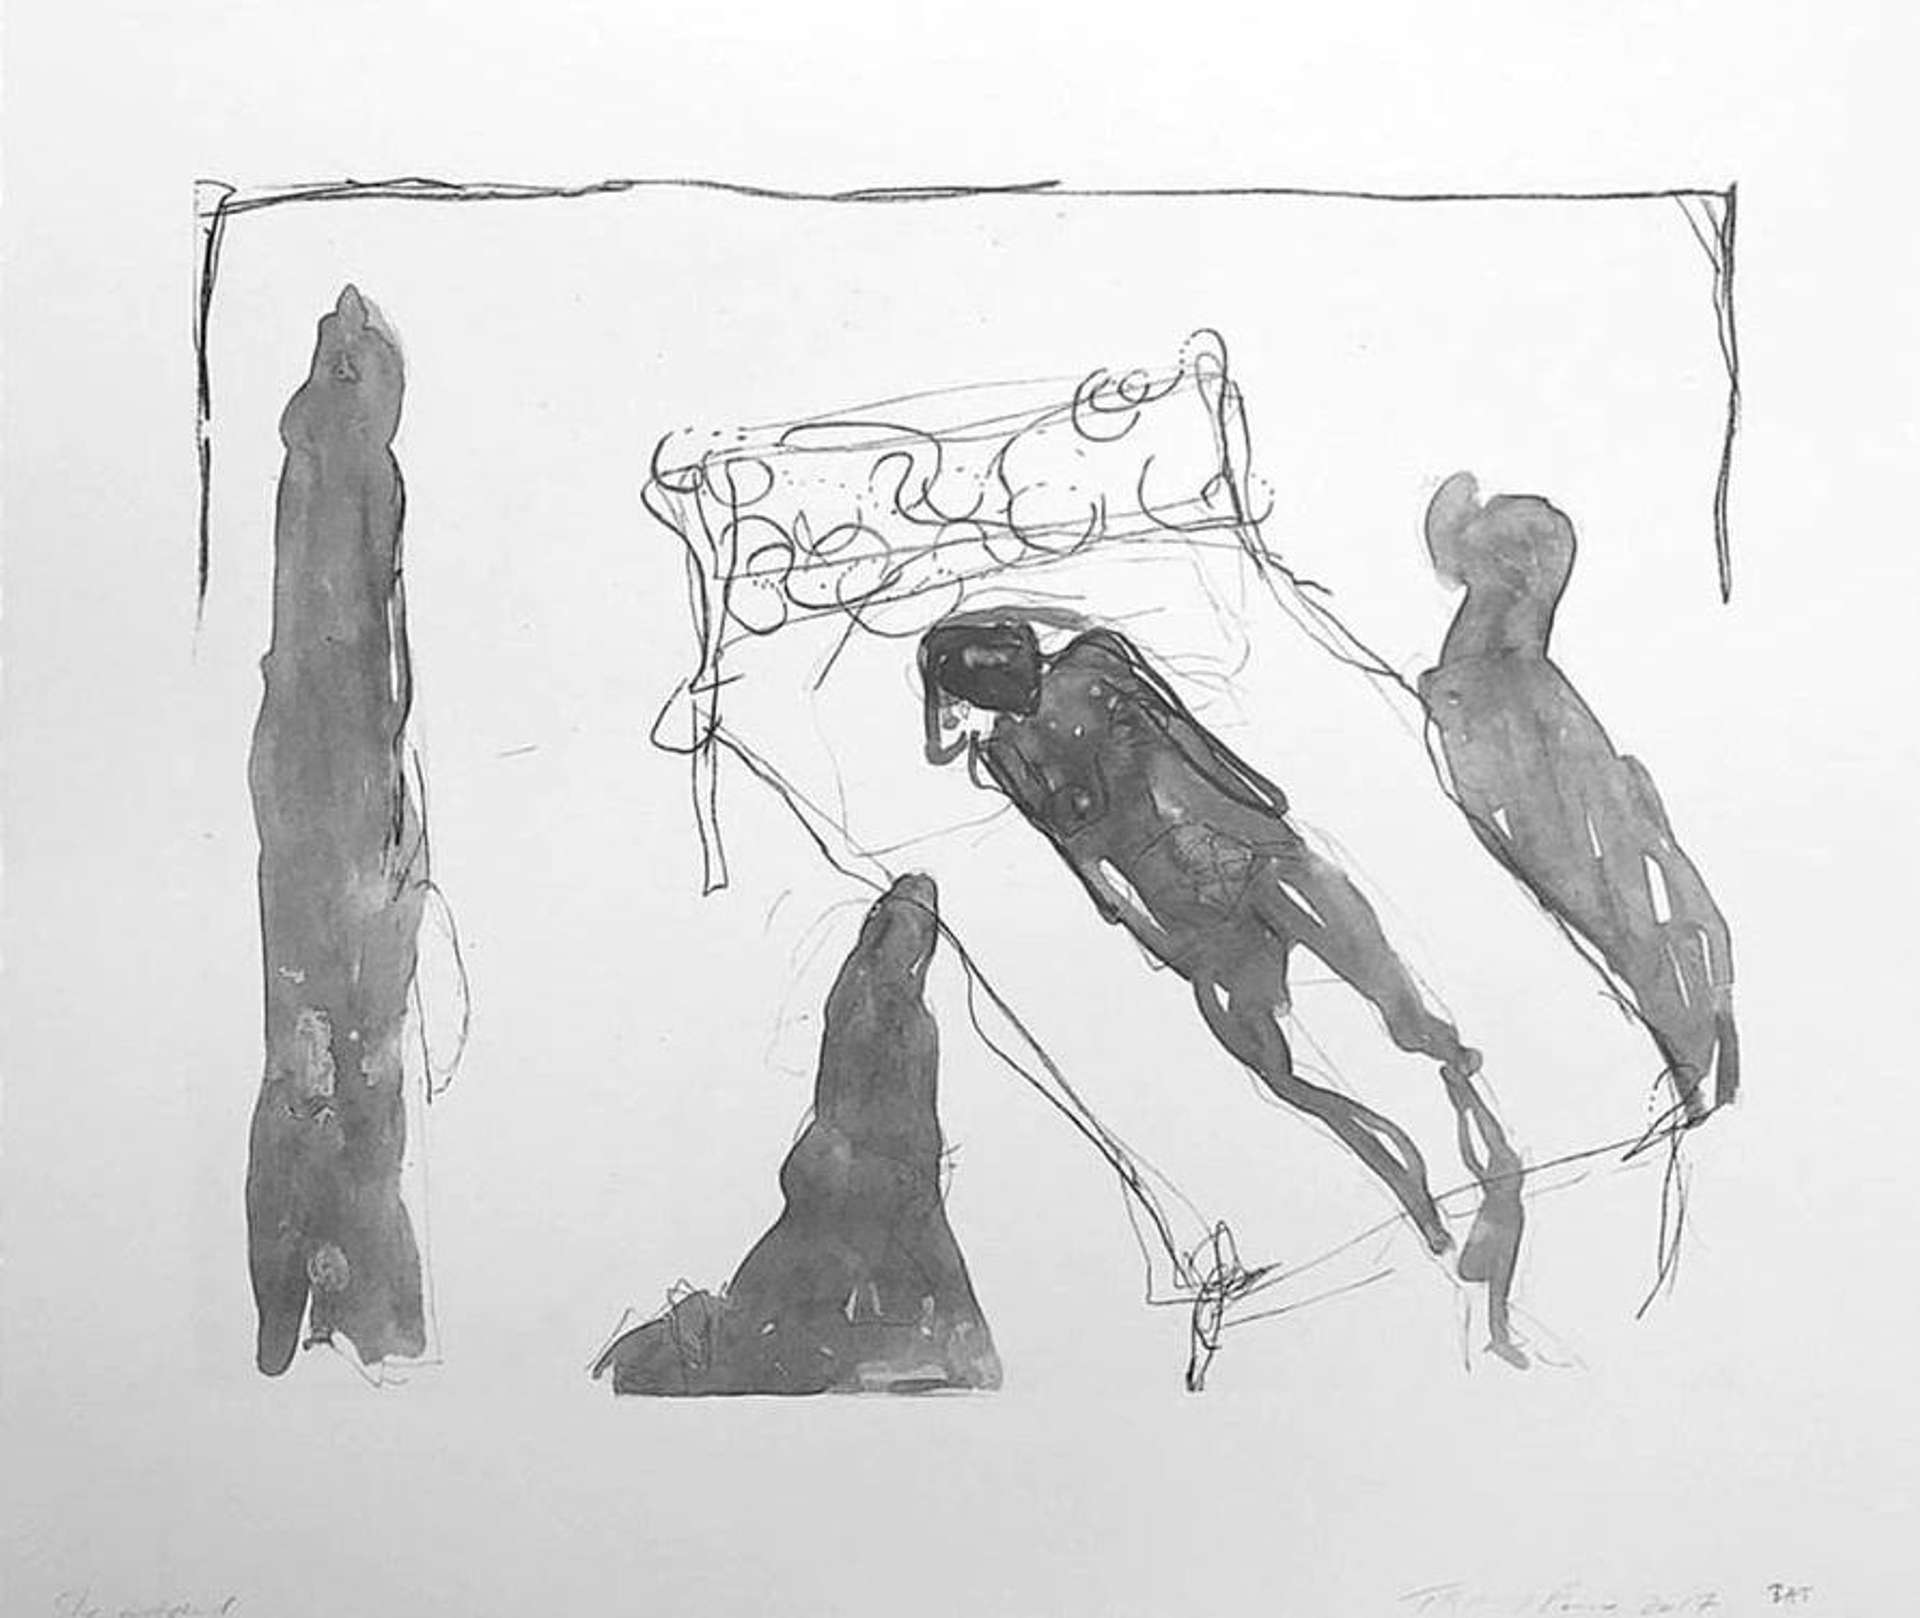 She Watched - Signed Print by Tracey Emin 2017 - MyArtBroker